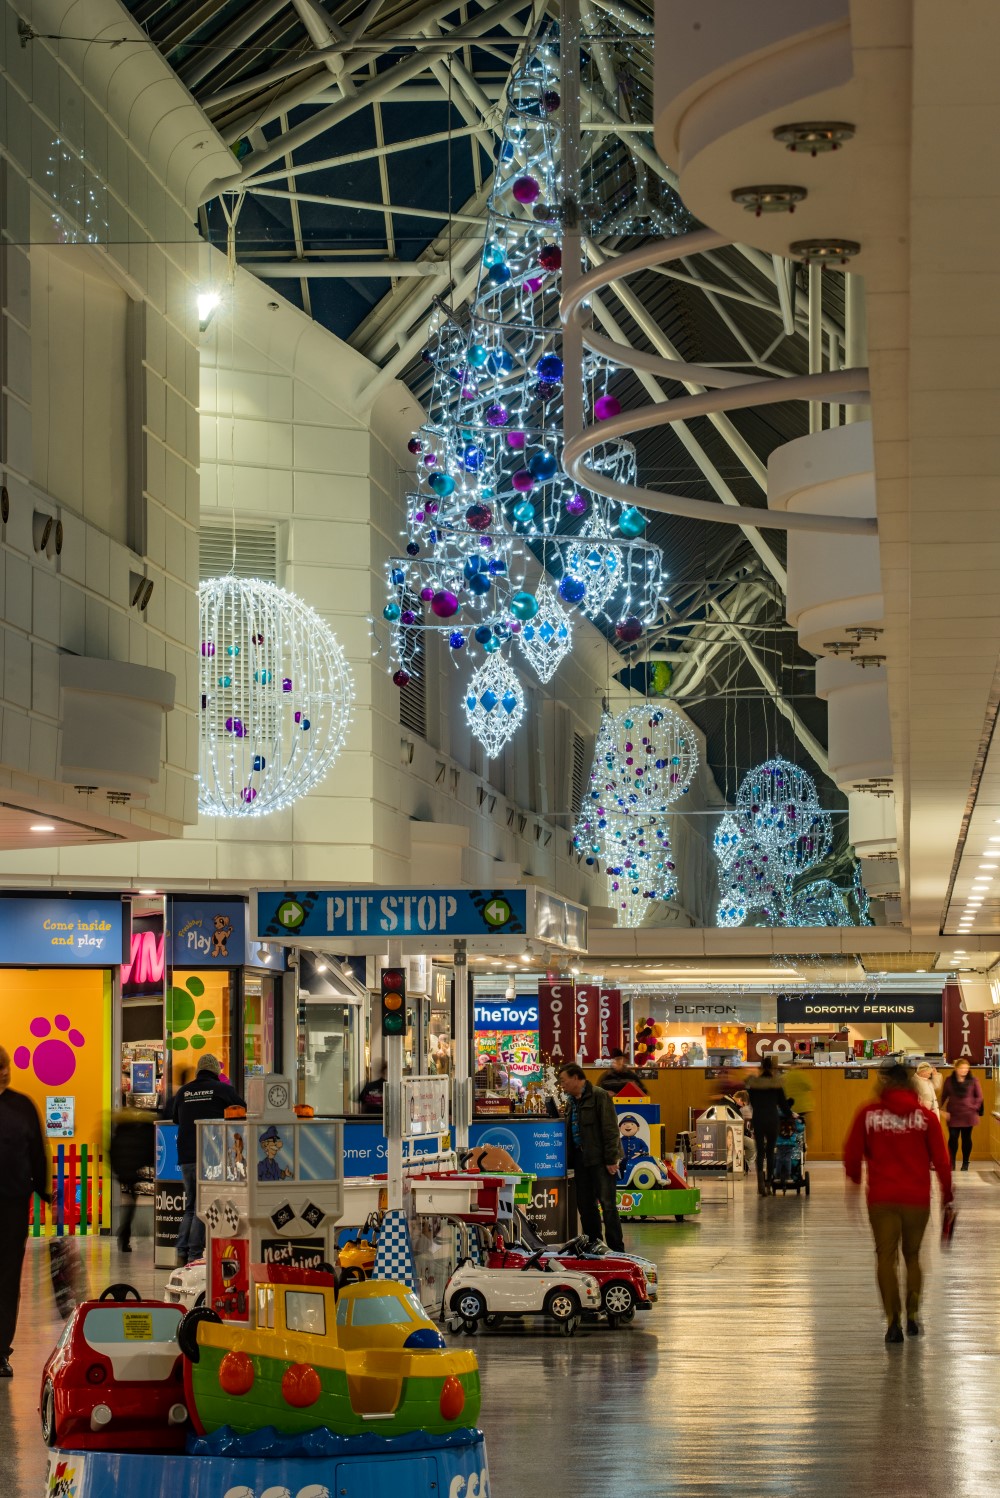 Large bright white aurora balls and spiral Christmas trees suspended from the ceiling, decorated with light blue, dark blue and purple baubles.